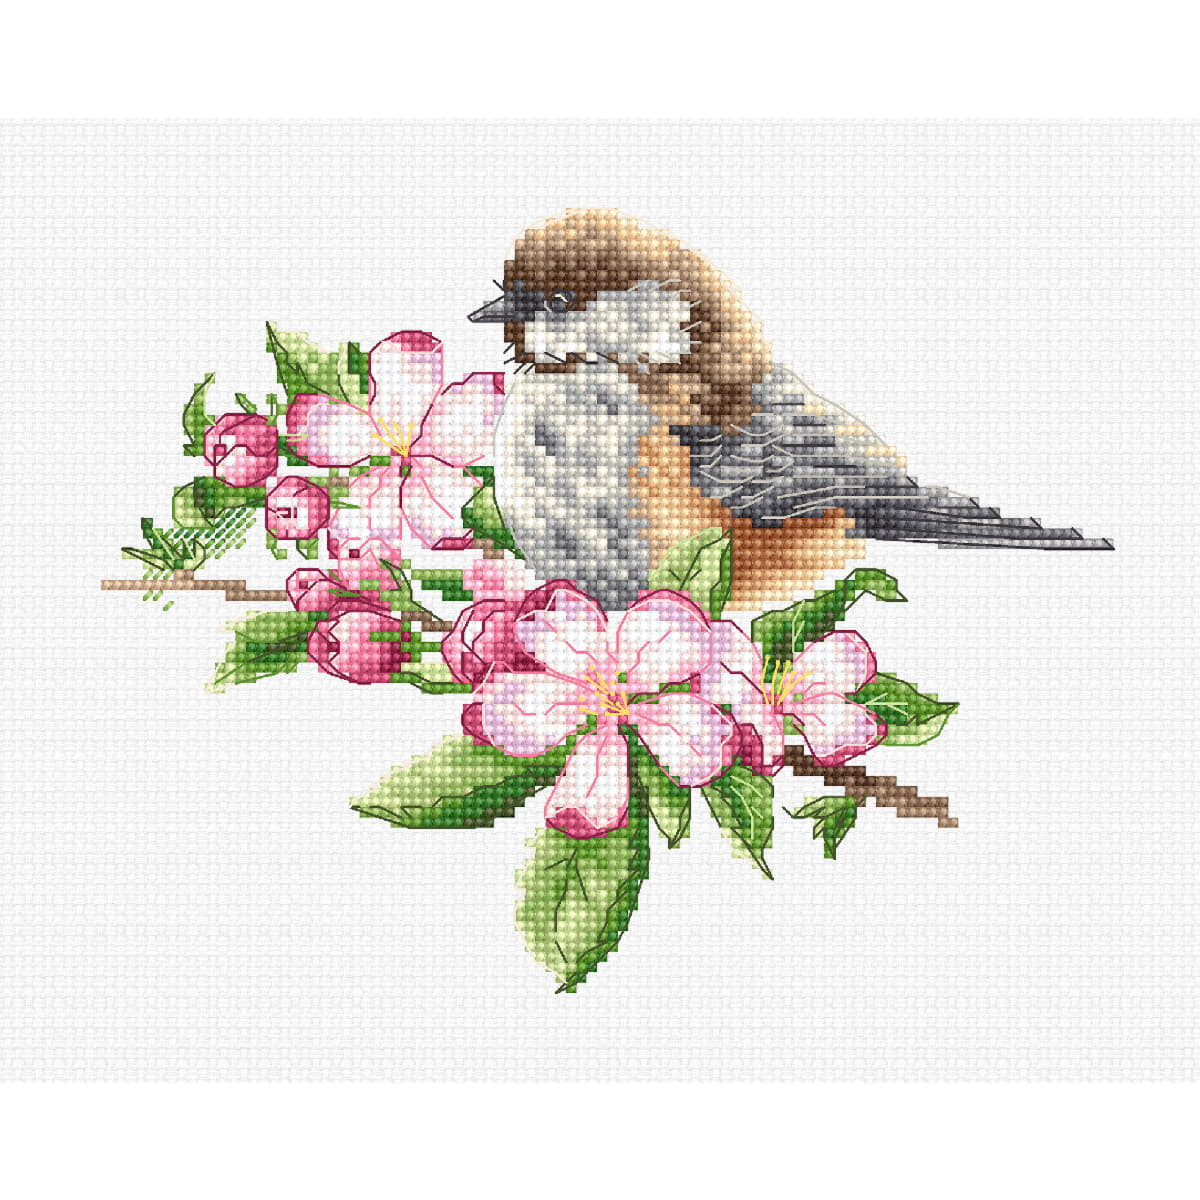 Luca-S counted cross stitch kit "The tit on the...